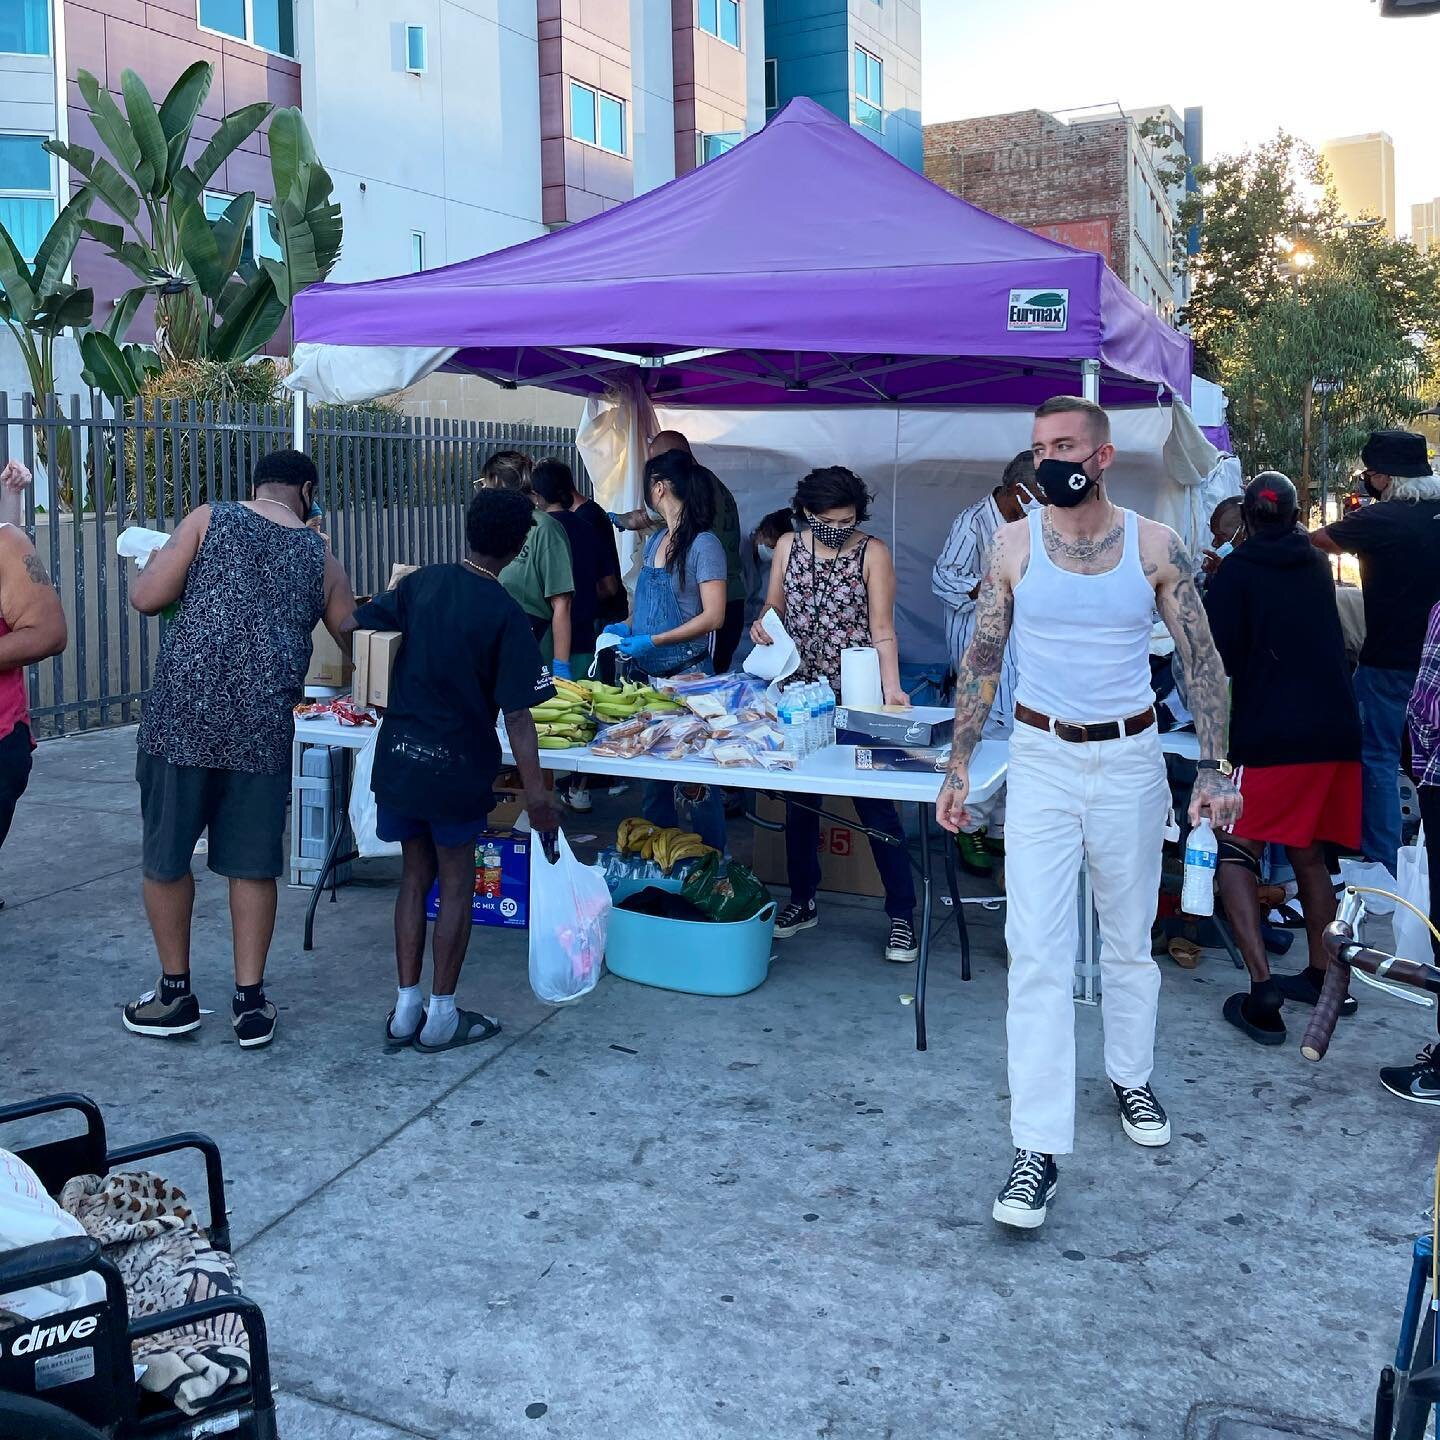 It takes a little bit of time and energy from a lot of committed people to hold down this corner for outreach. 
Tuesdays &amp; Thursdays 7am Java Gang
Sundays 630pm Yucca X Skid  Row 
Big shout out to @ilcapricciola for committing to hot food donatio